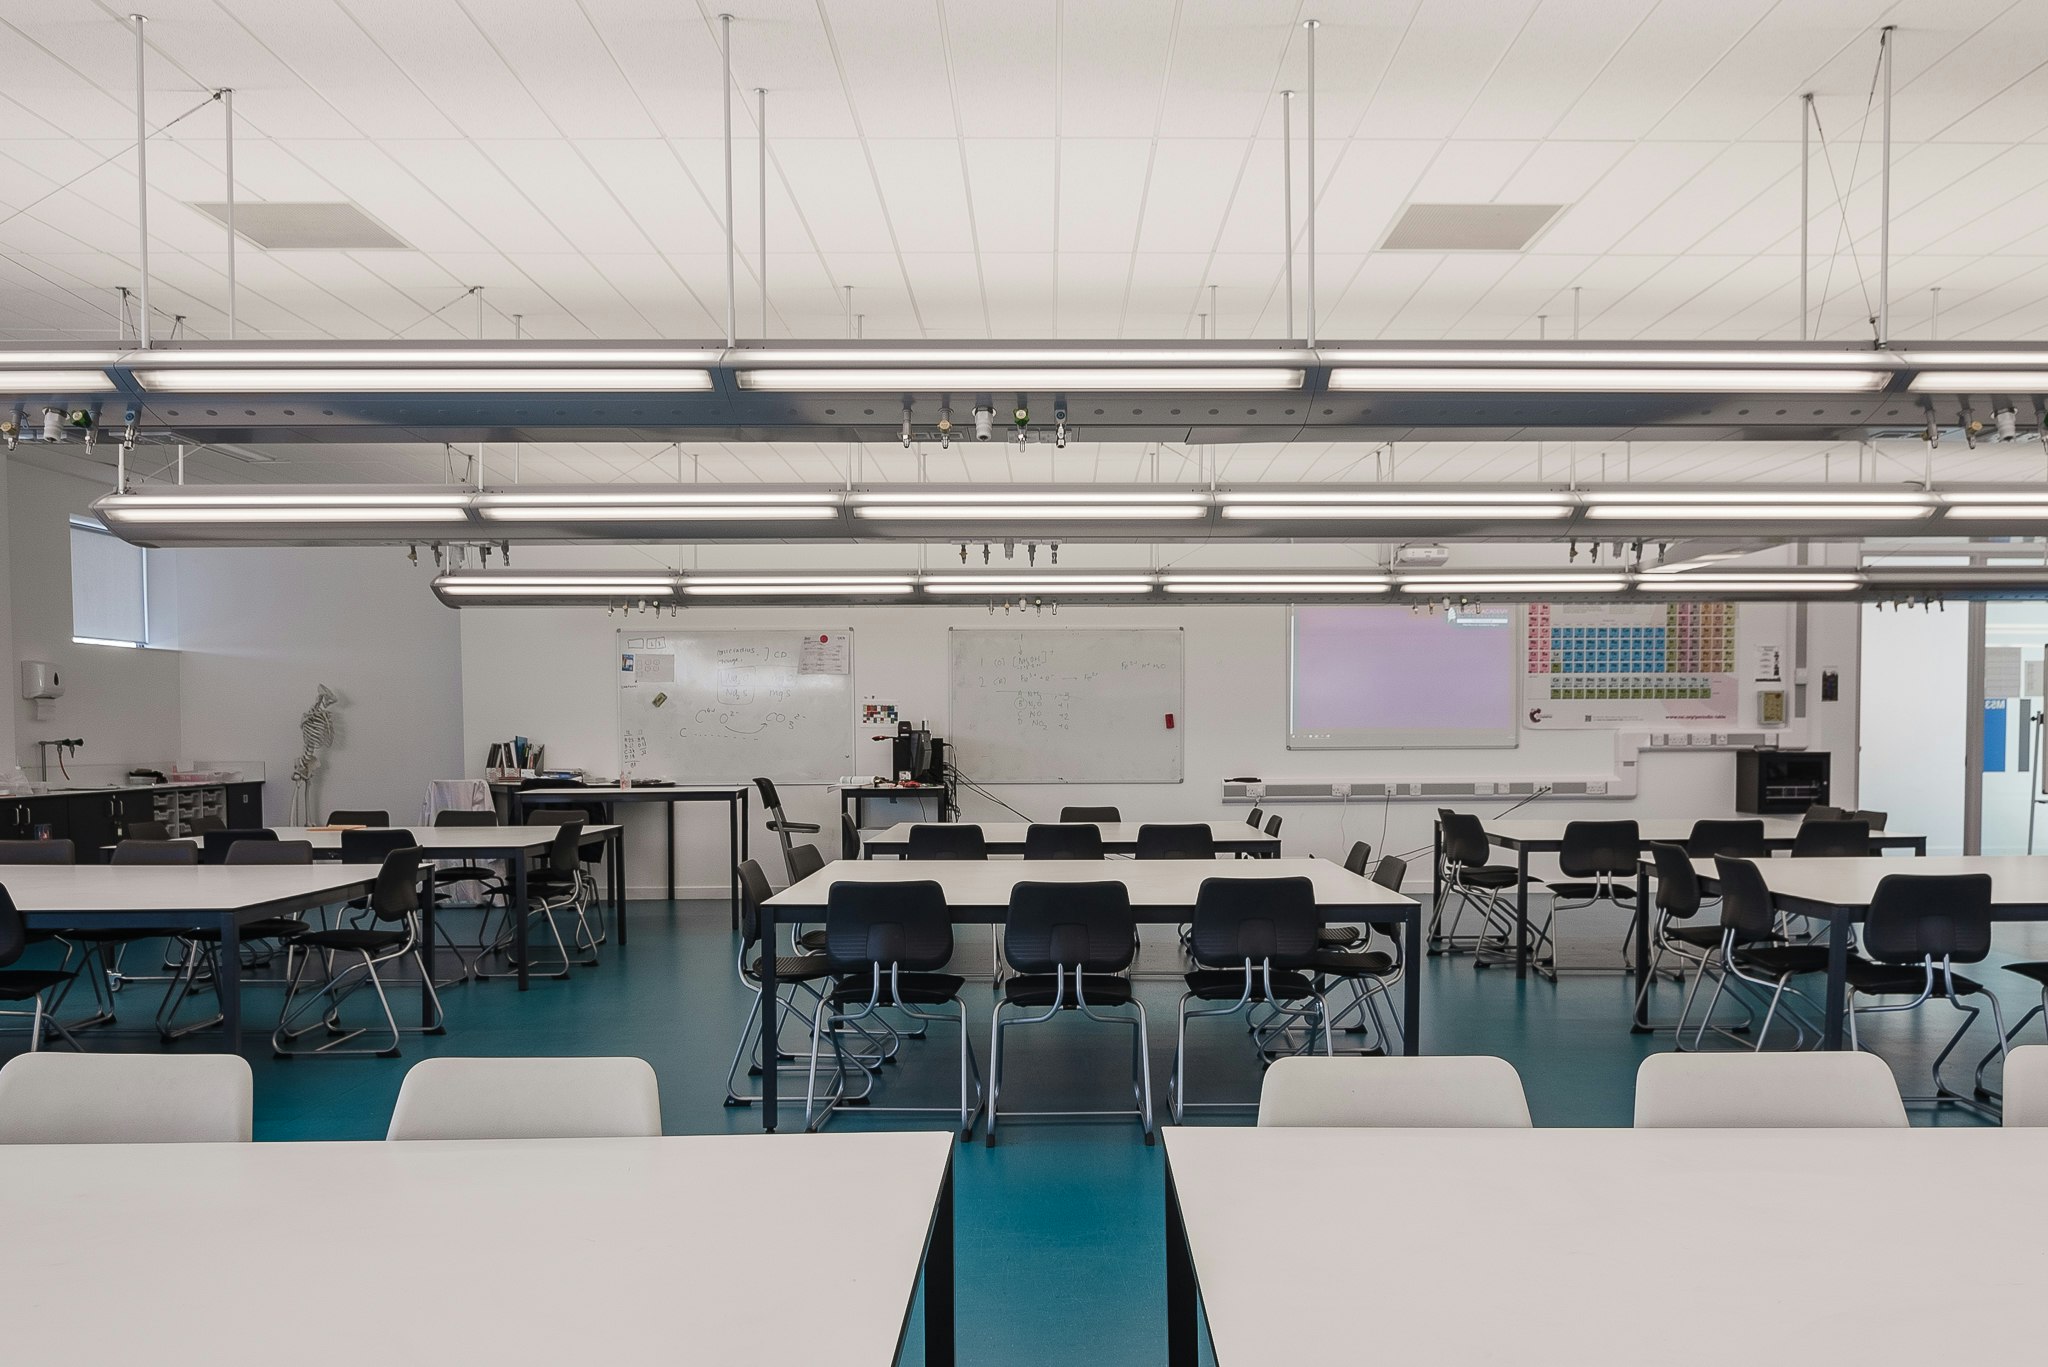 London Academy of Excellence Tottenham - Science classroom / Laboratory image 7